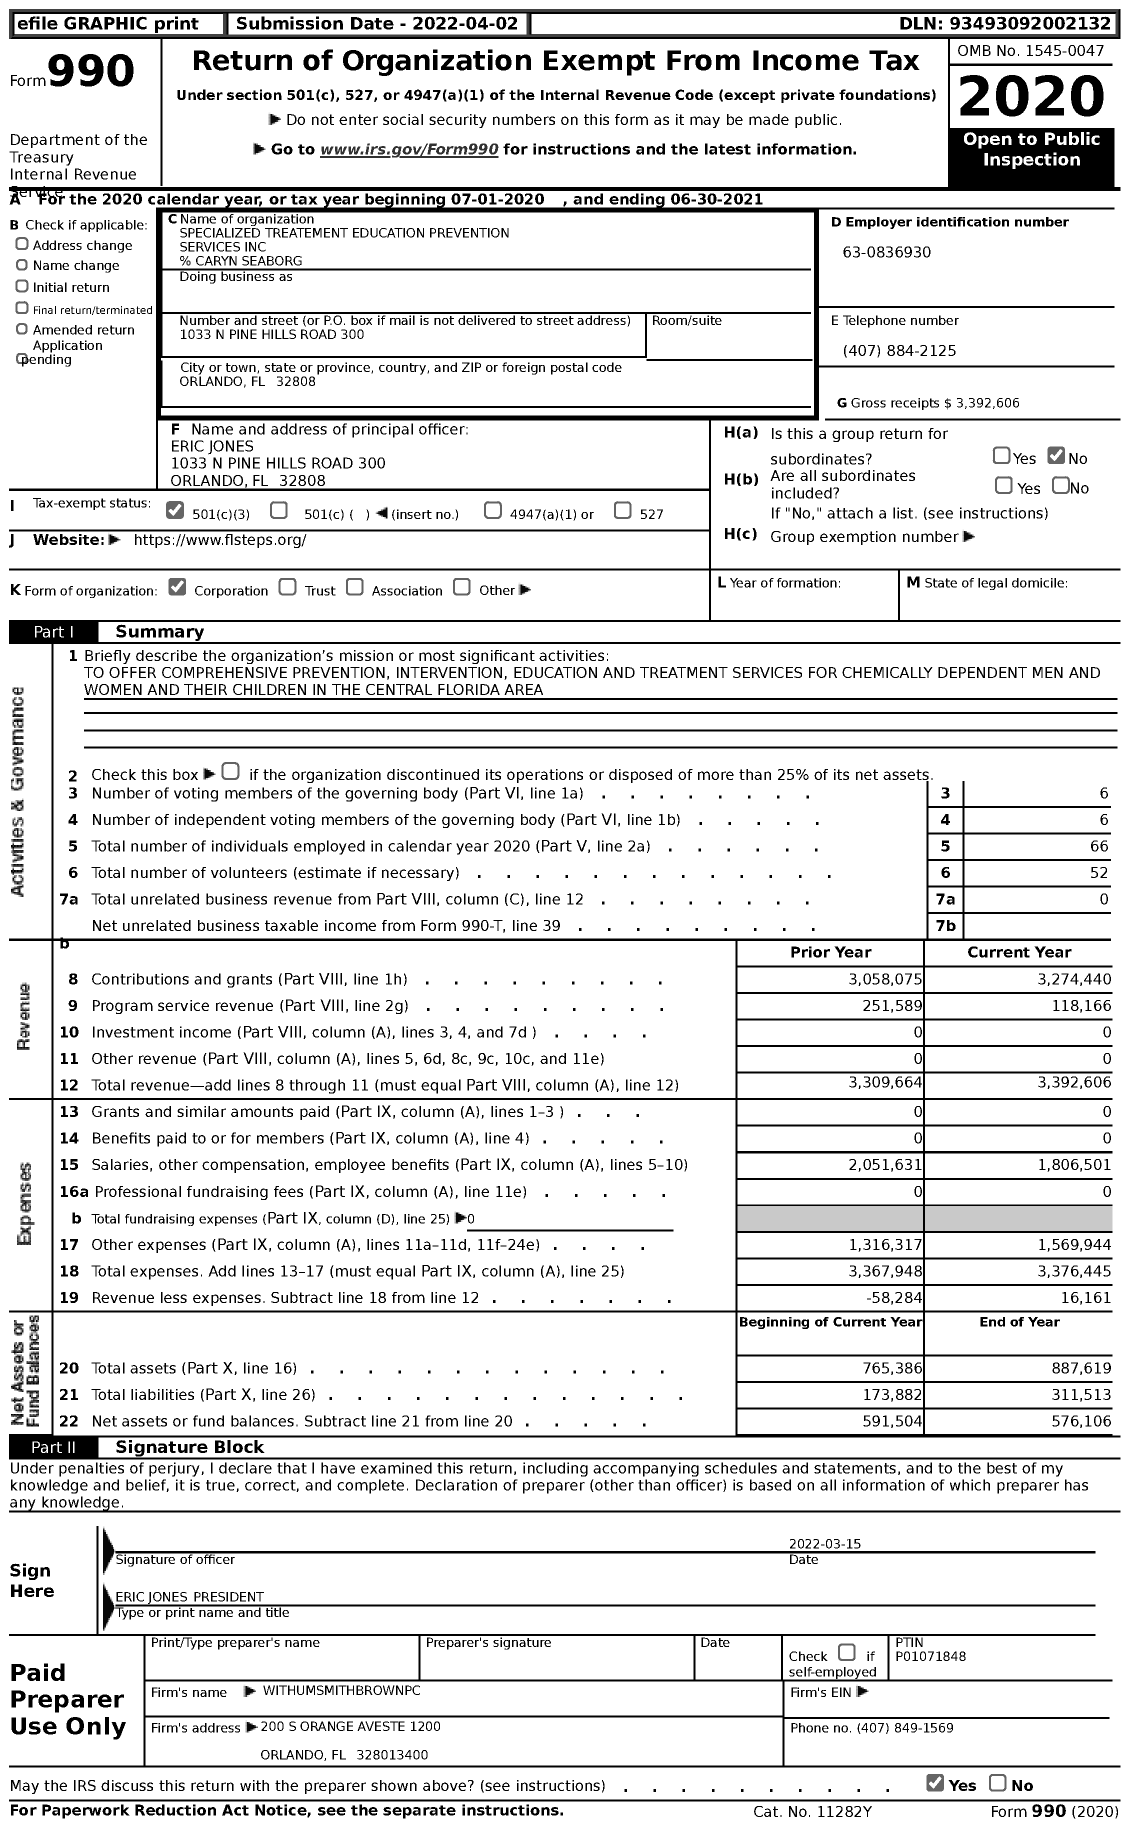 Image of first page of 2020 Form 990 for Specialized Treatment Education Prevention Services (STEPS)